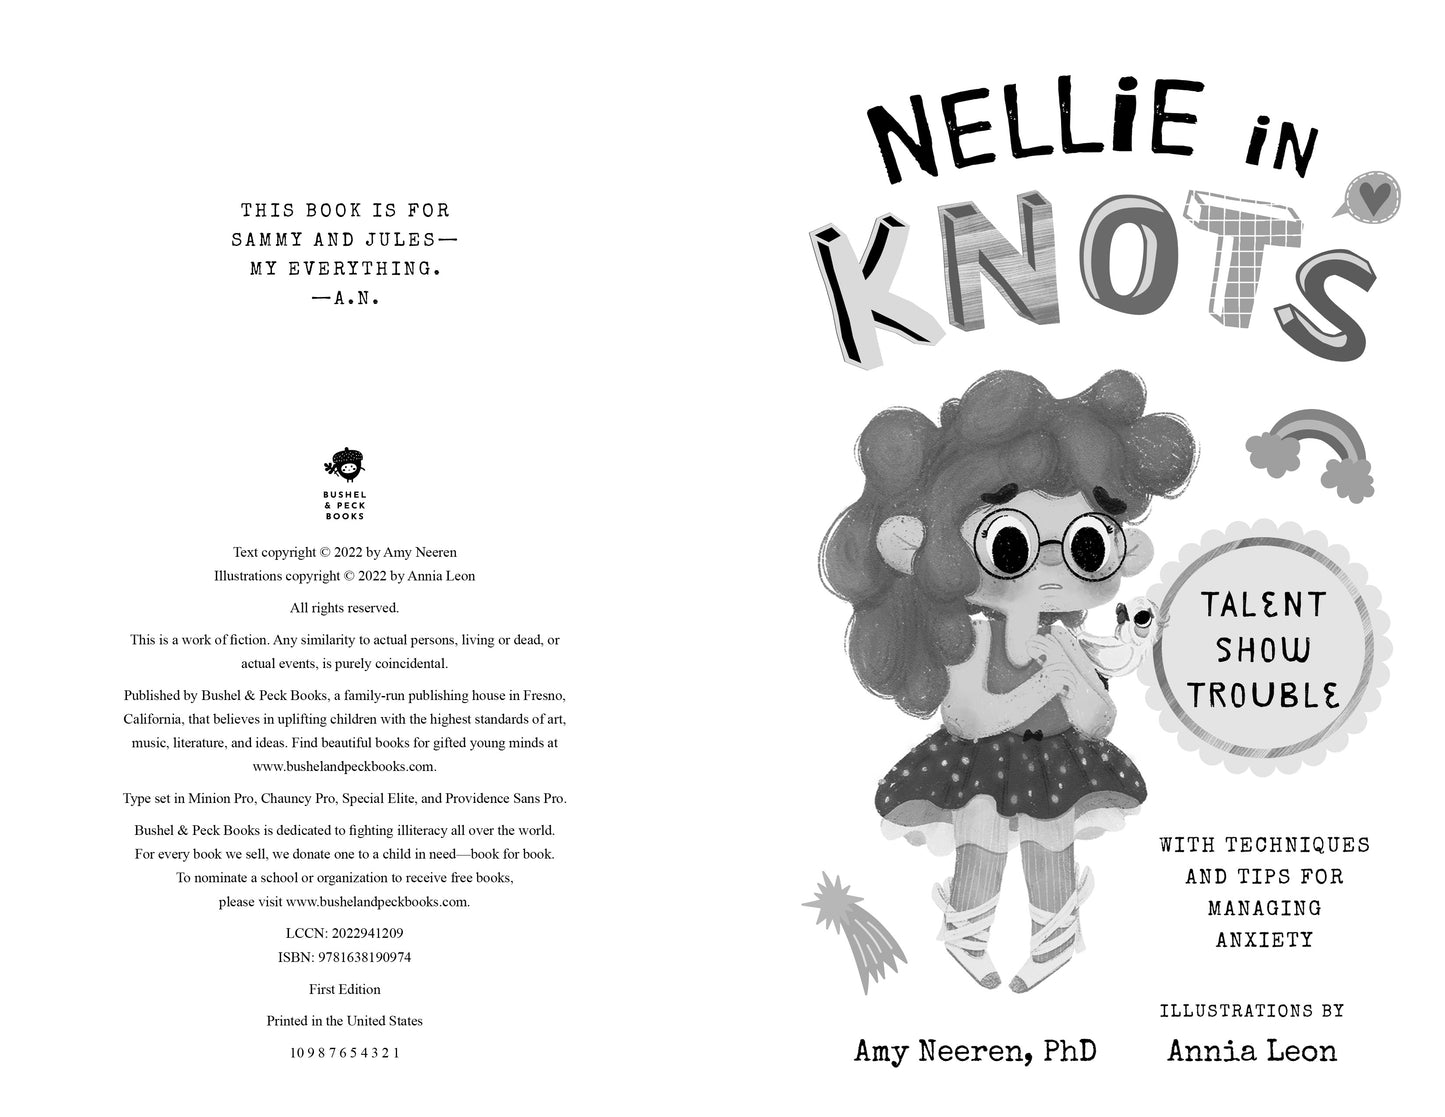 Nellie in Knots: Talent Show Trouble